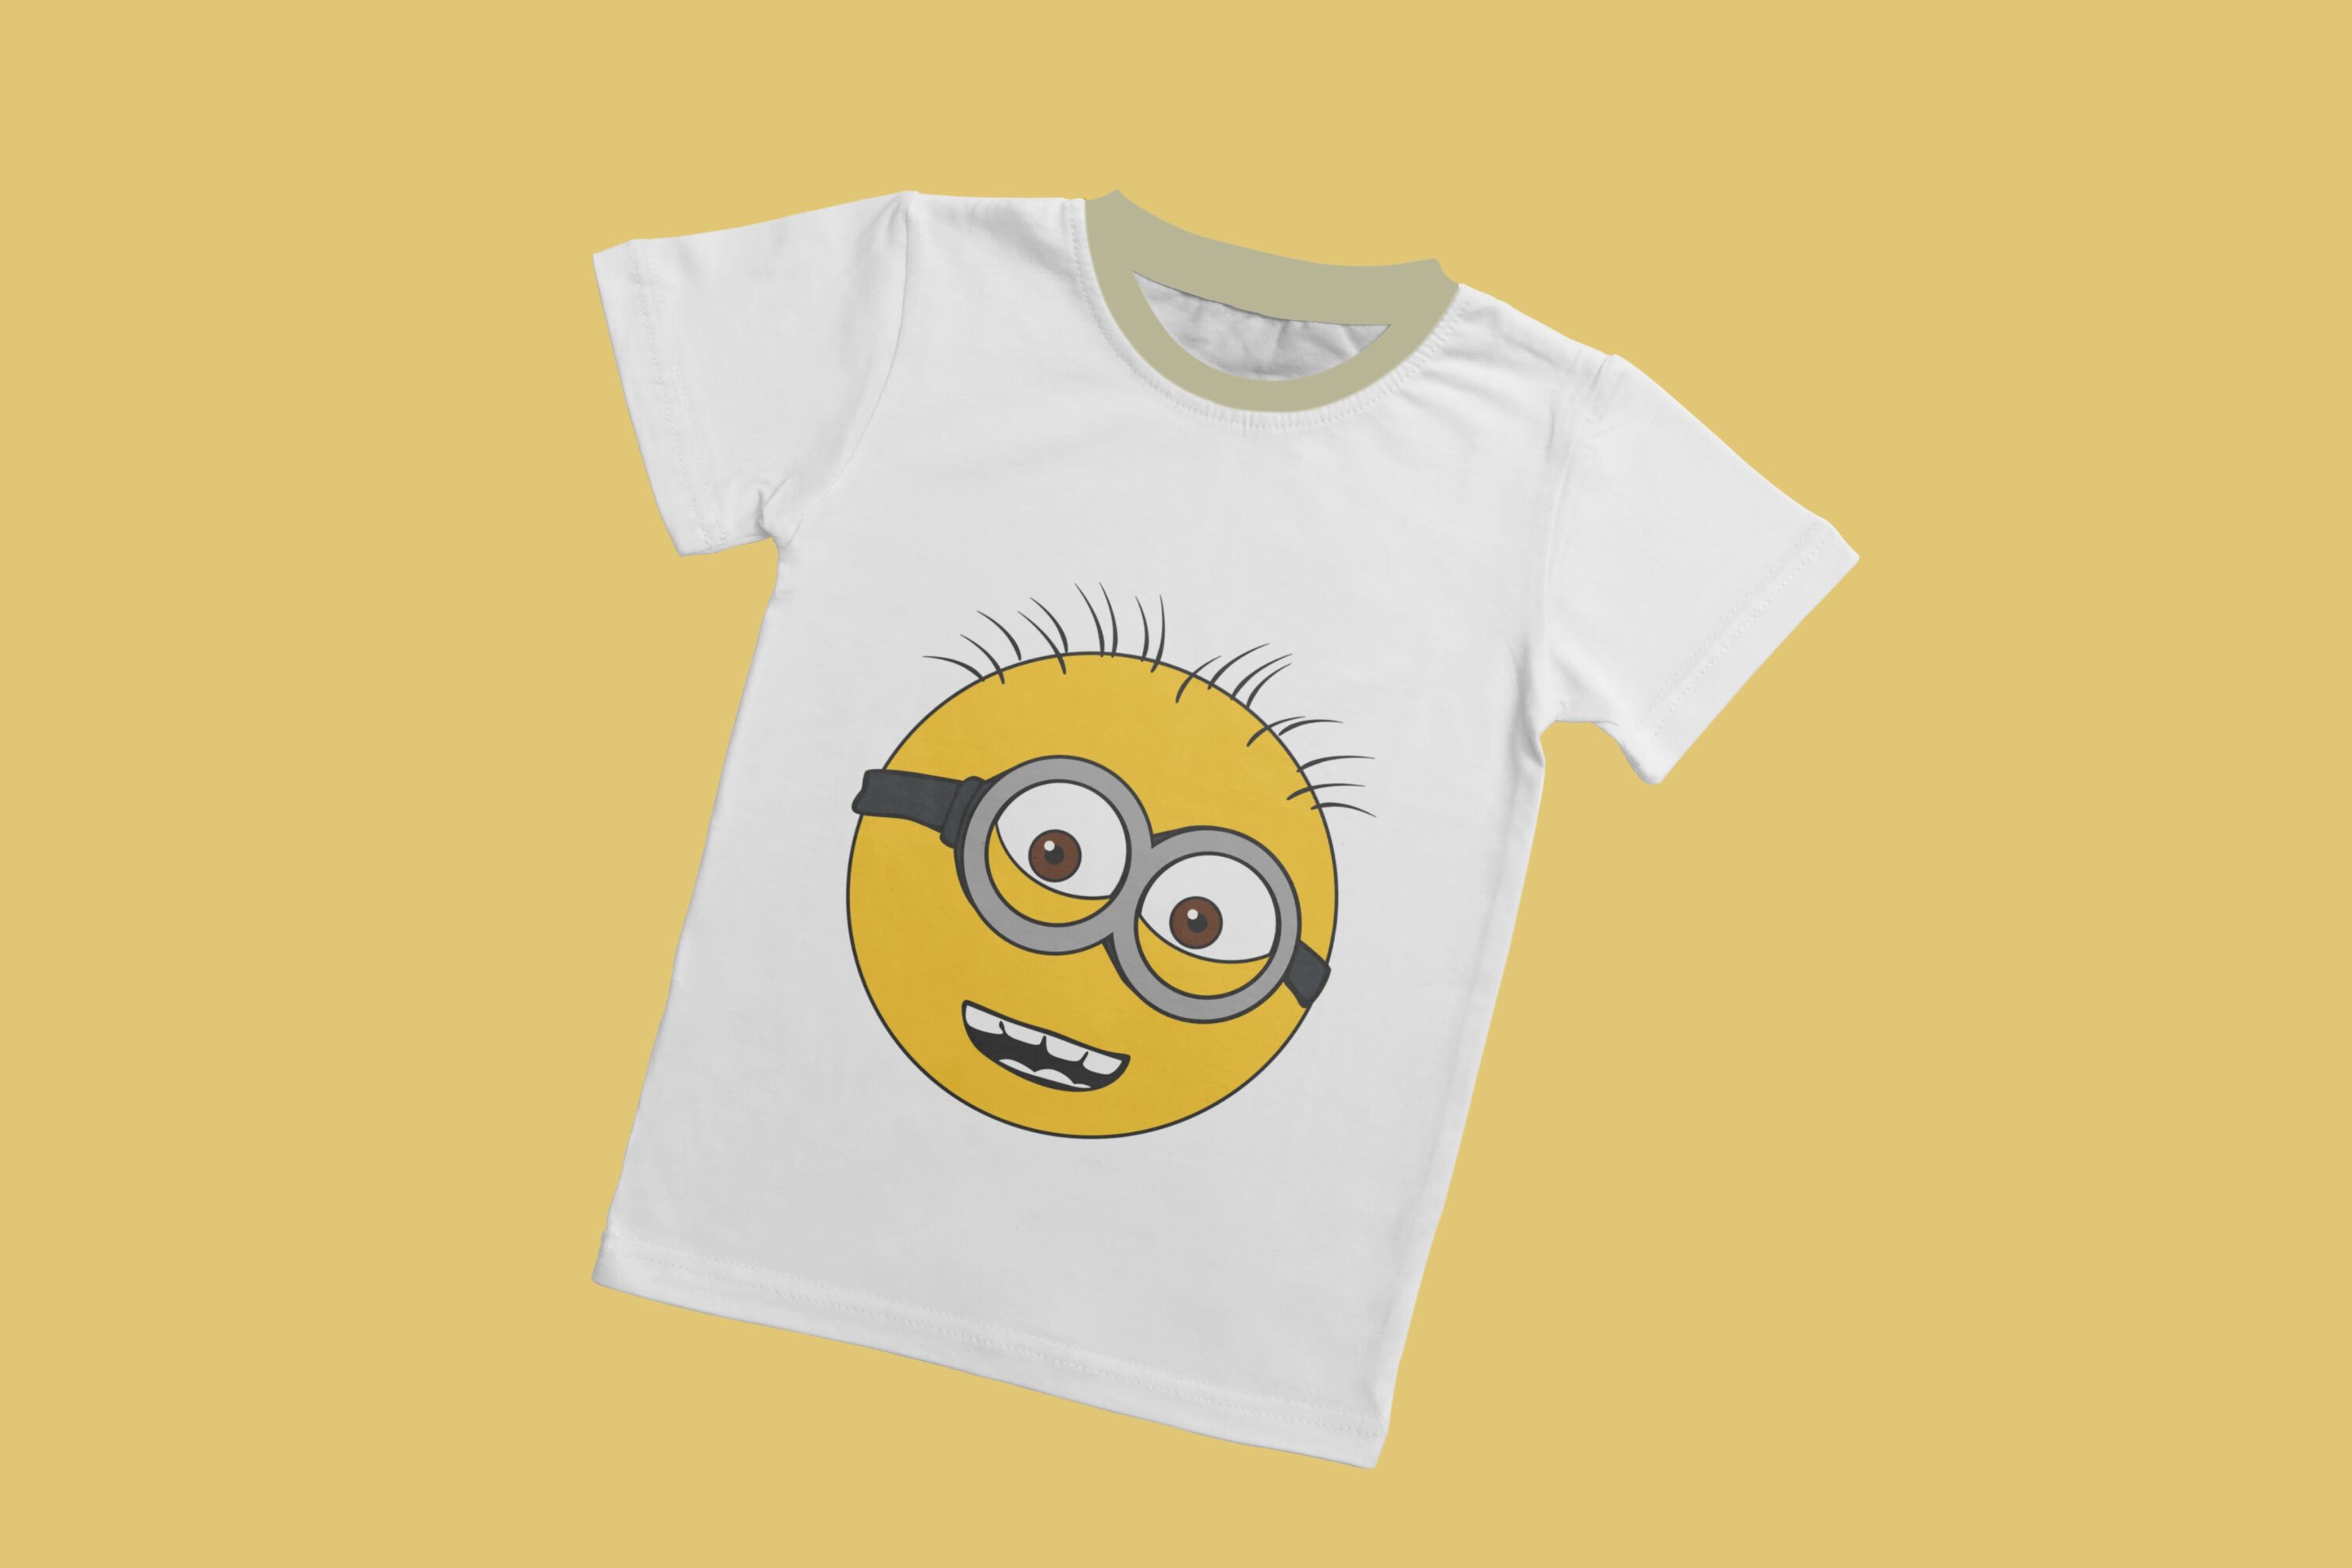 A white T-shirt with a mint collar and a face of a laughing minion.